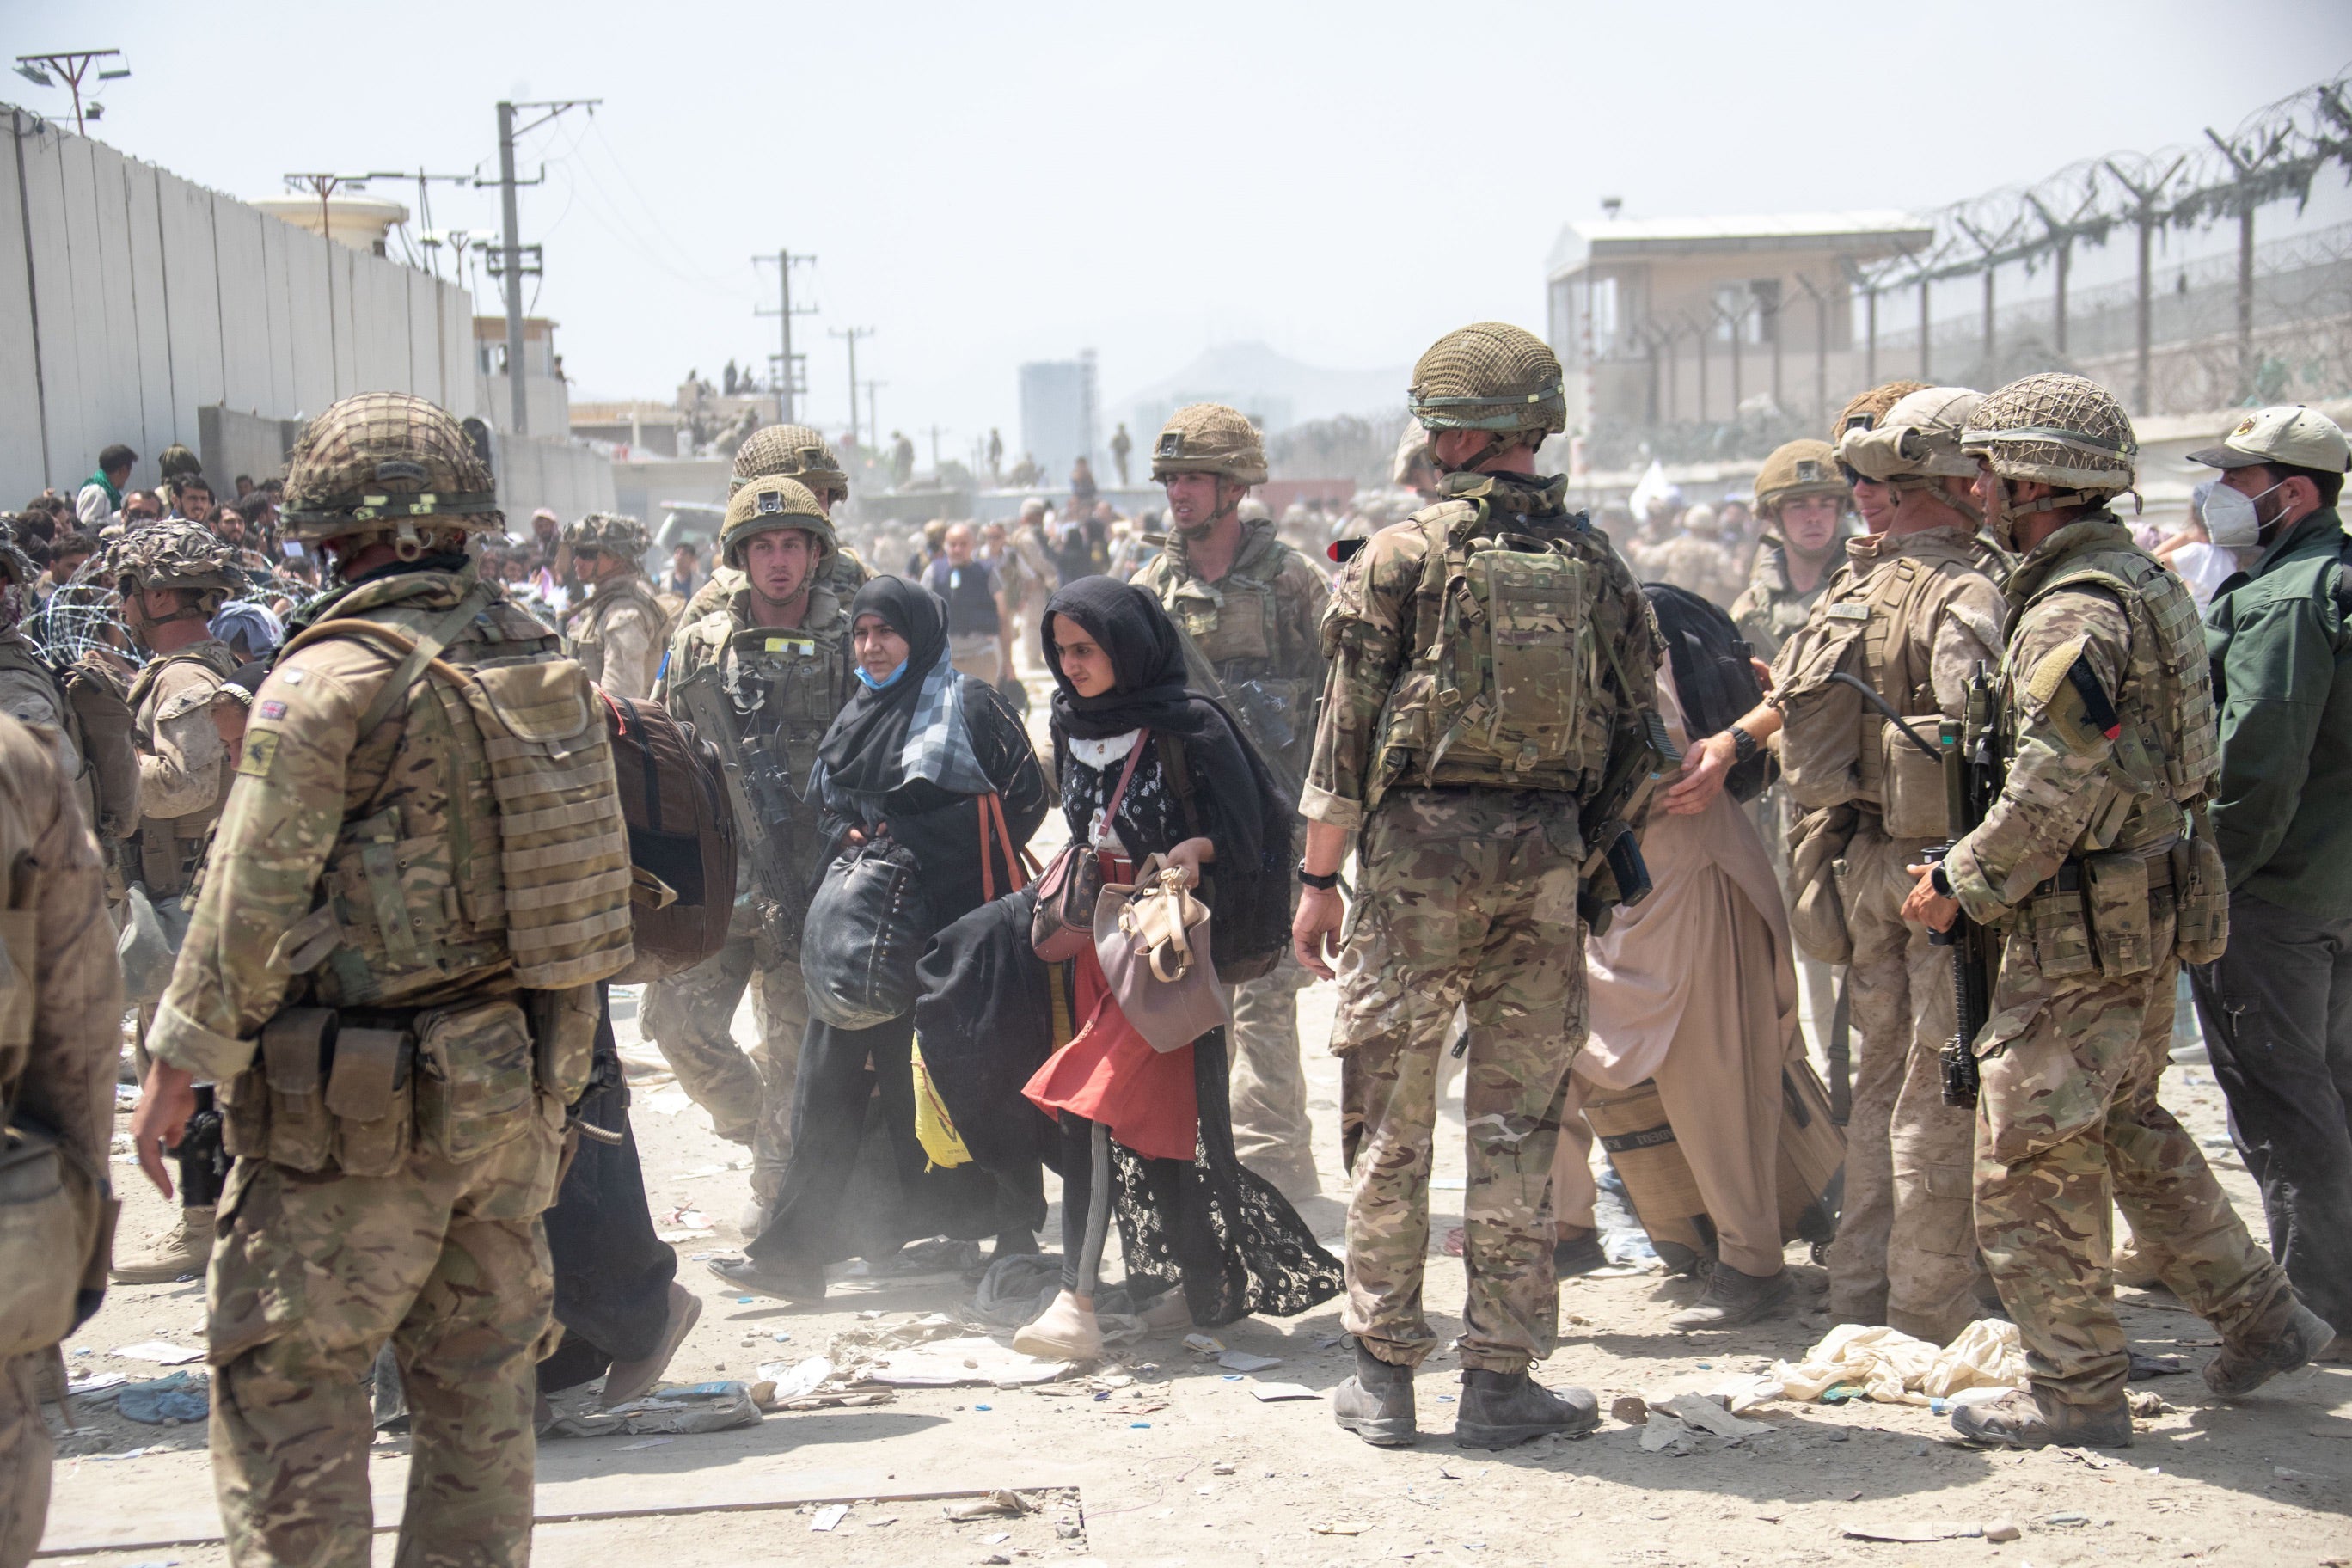 The British armed forces work with the US military to evacuate eligible civilians and their families out of the country on August 21, 2021 in Kabul, Afghanistan.